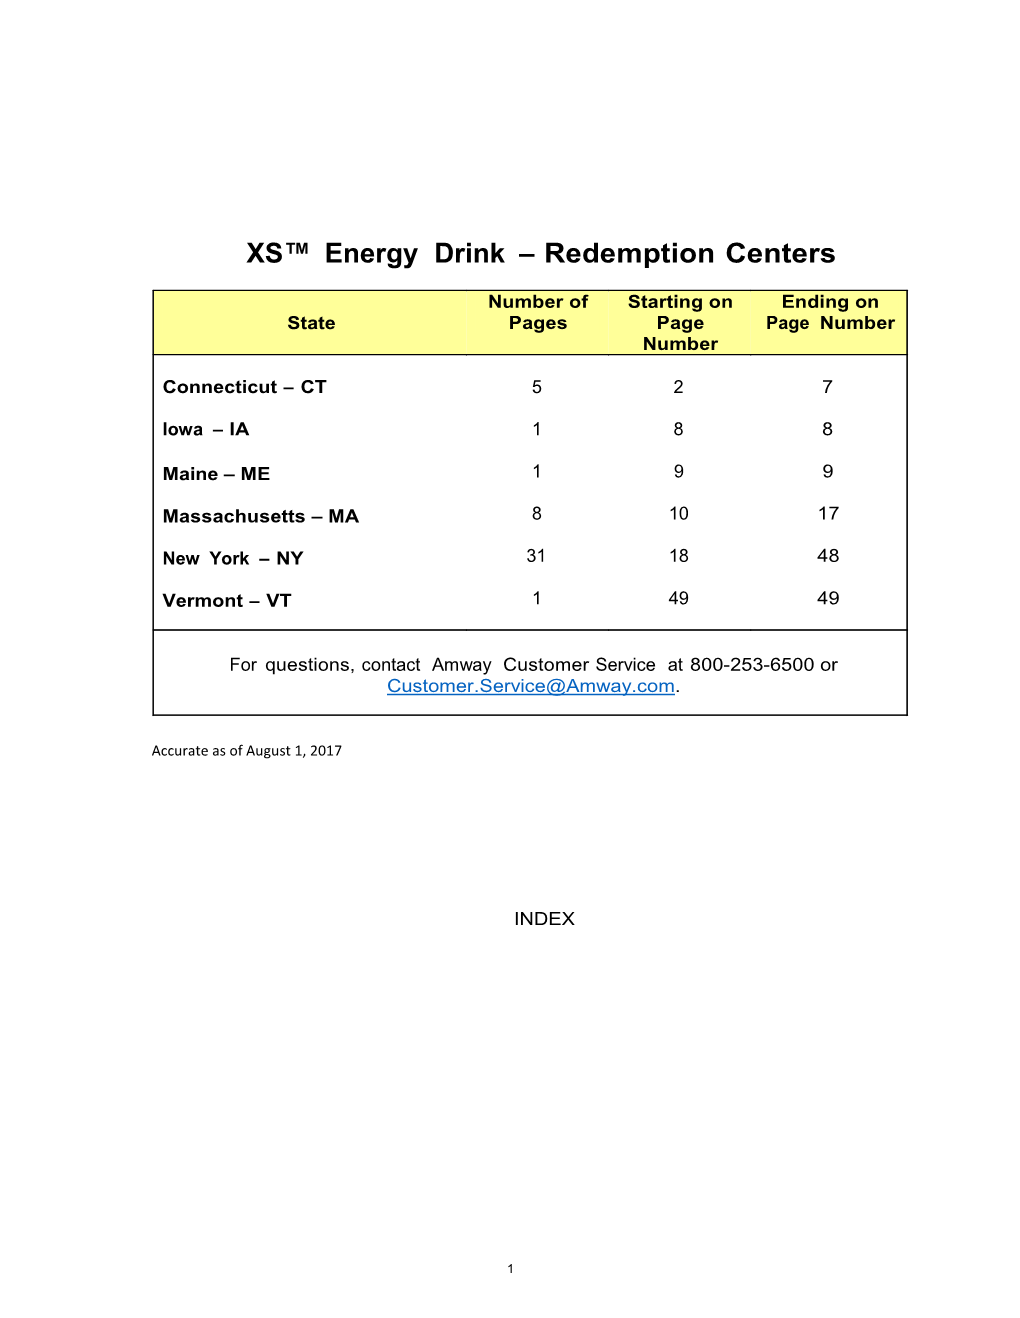 XS™ Energy Drink – Redemption Centers